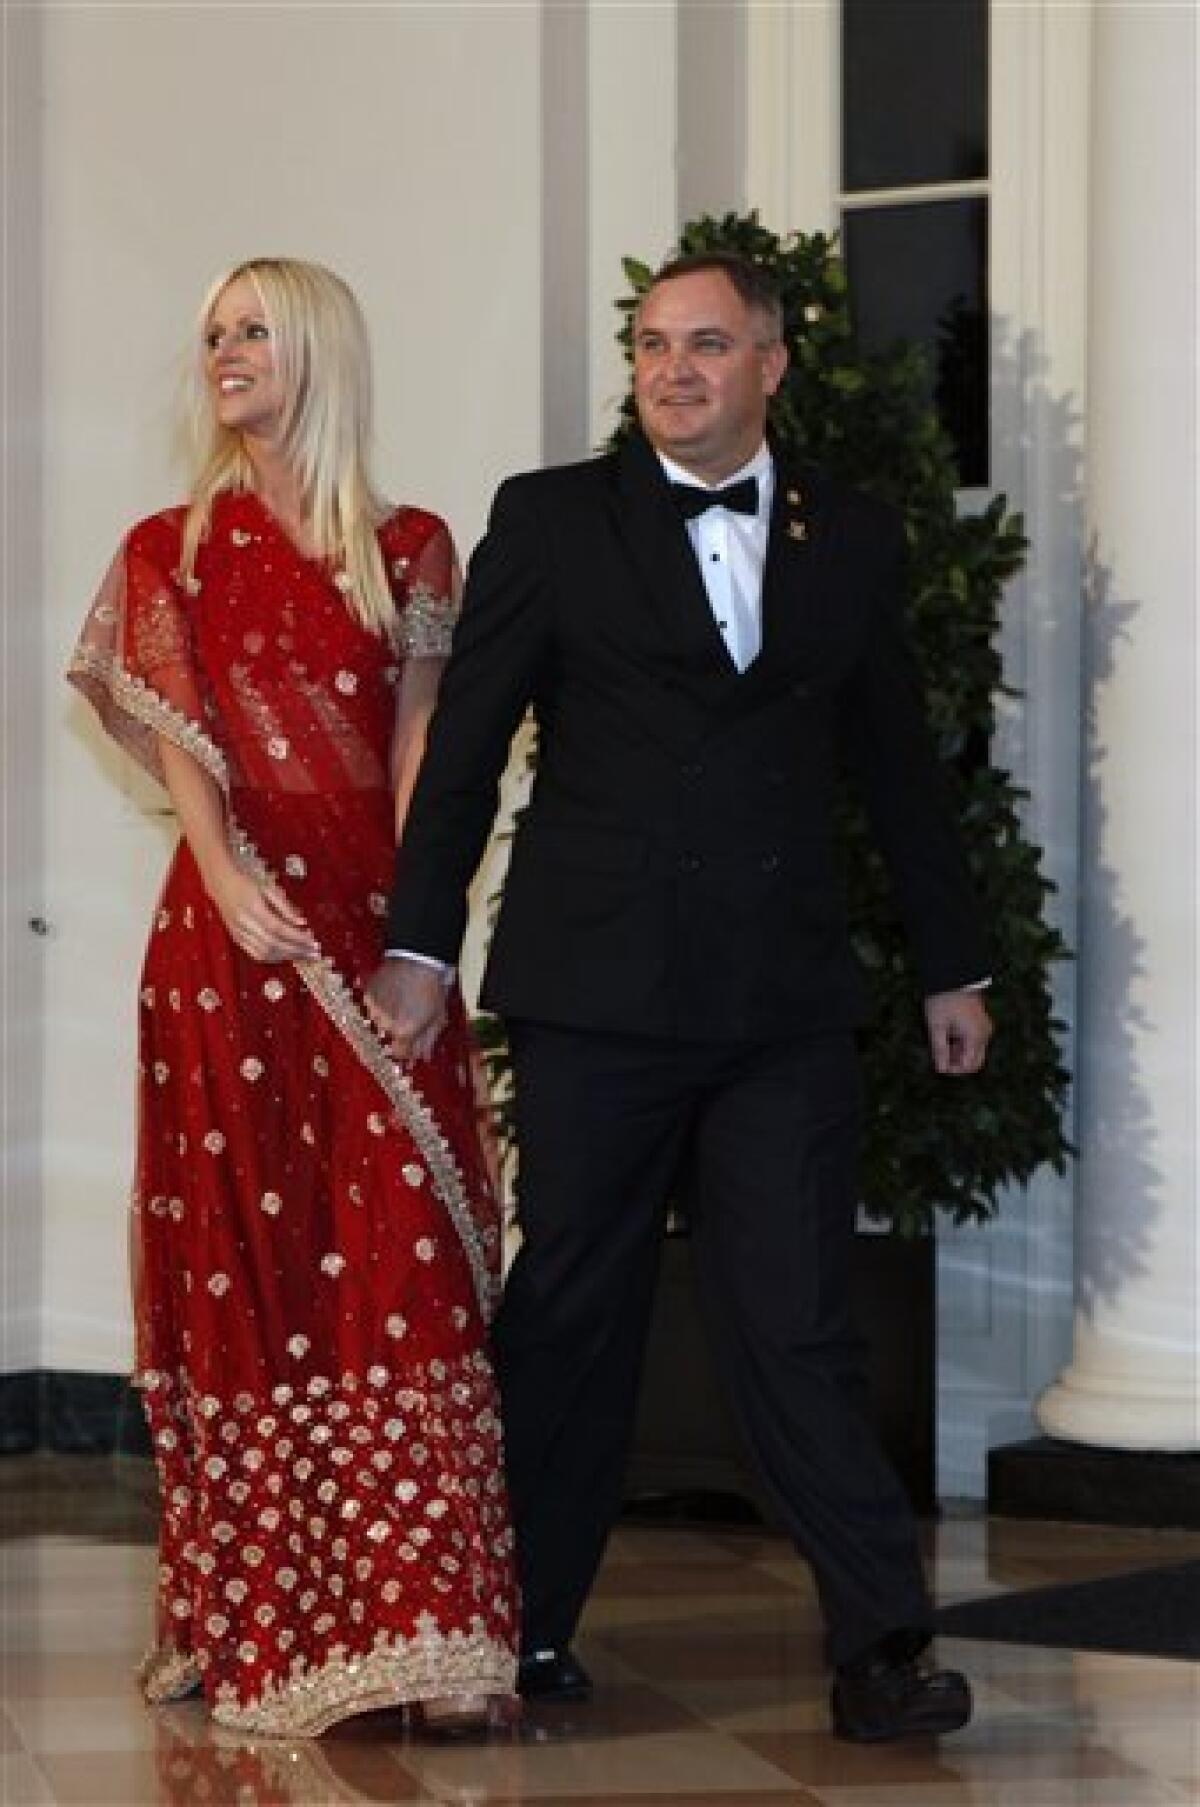 In this Tuesday, Nov. 24, 2009 photo, Michaele and Tareq Salahi, right, arrive at a State Dinner hosted by President Barack Obama for Indian Prime Minister Manmohan Singh at the White House in Washington. The Secret Service is looking into its own security procedures after determining that the Virginia couple managed to slip into Tuesday night's state dinner at the White House even though they were not on the guest list, agency spokesman Ed Donovan said. (AP Photo/Gerald Herbert)